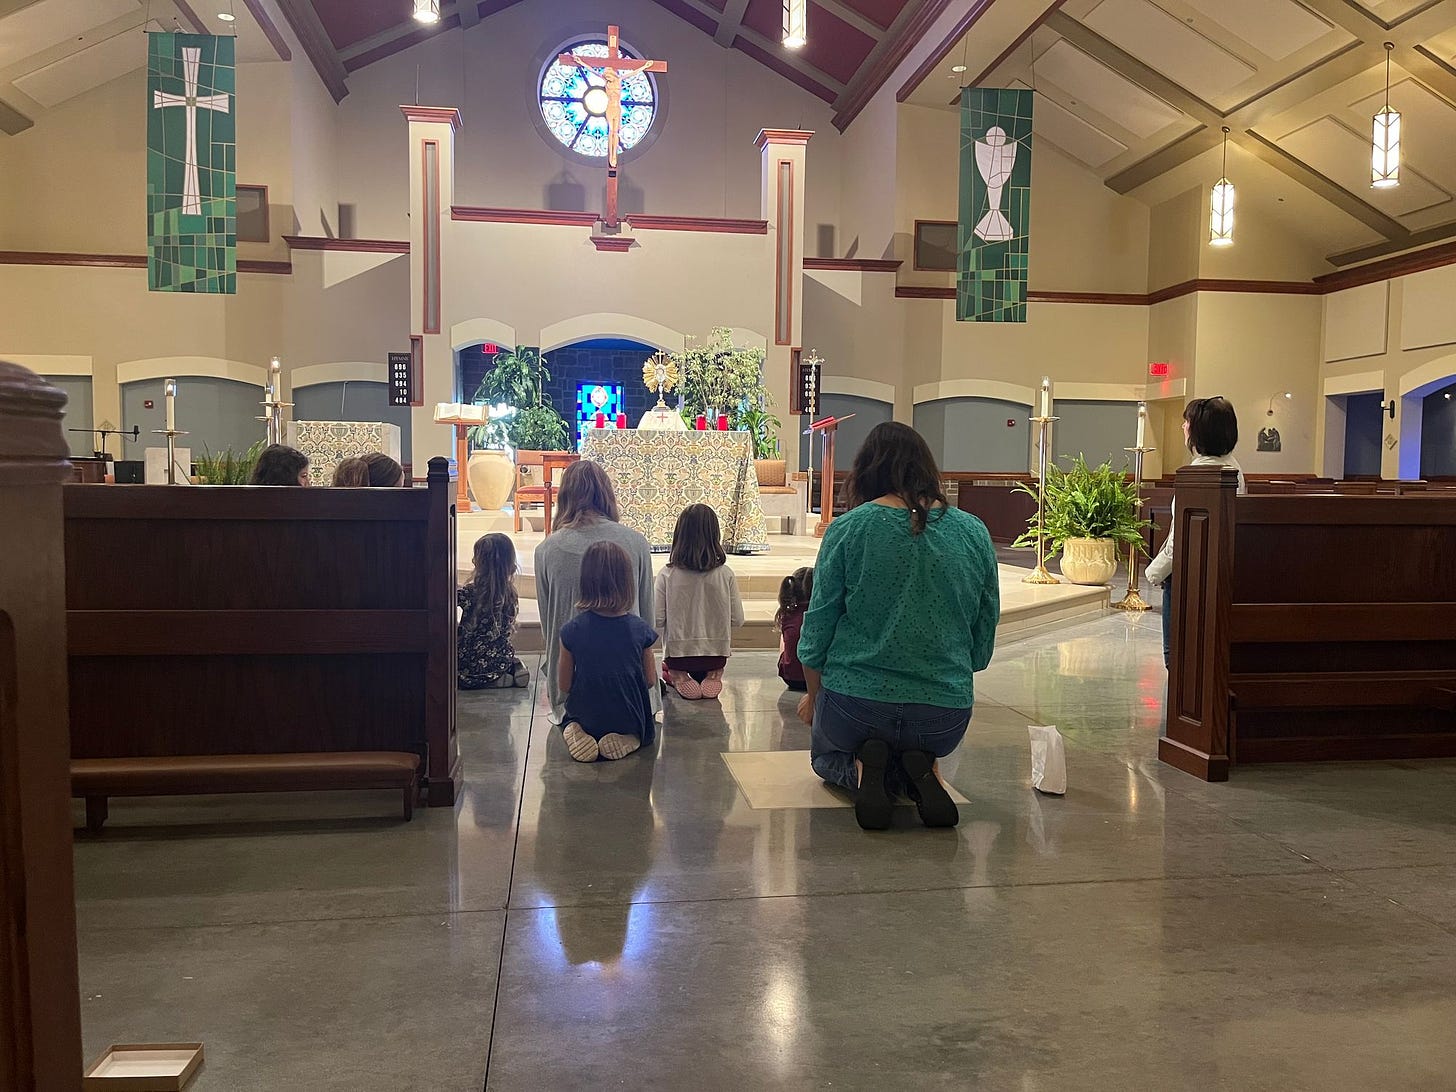 Children’s adoration offers young families a chance for prayer, community